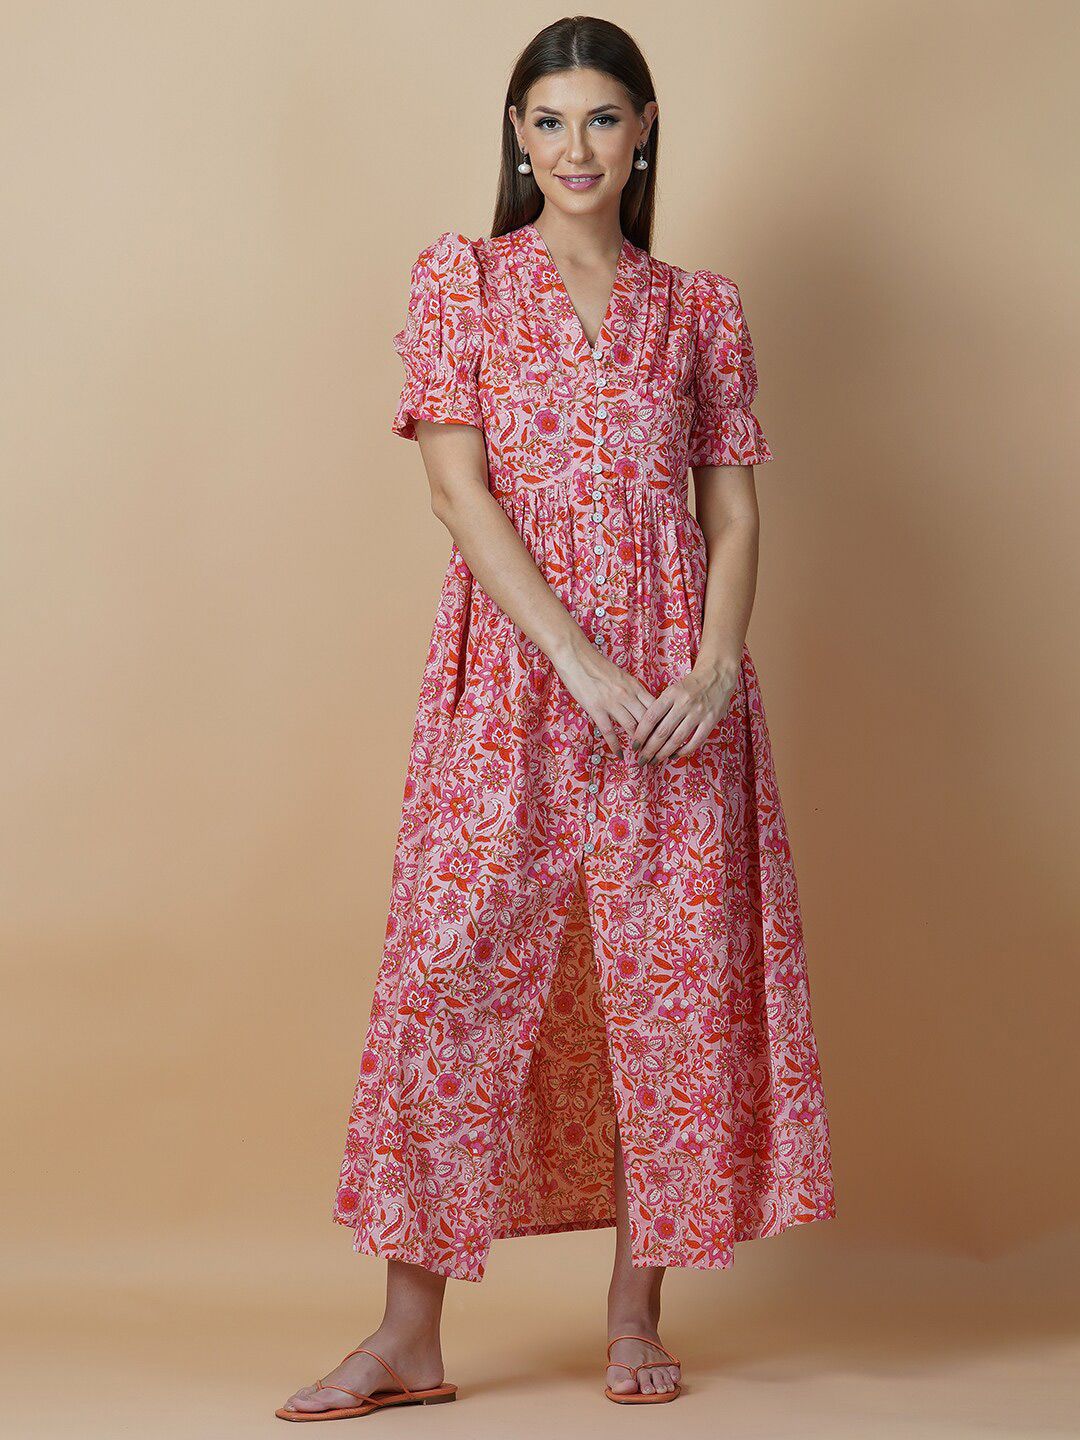 Twilldor Pink Cotton Floral Ethnic Maxi Dress Price in India